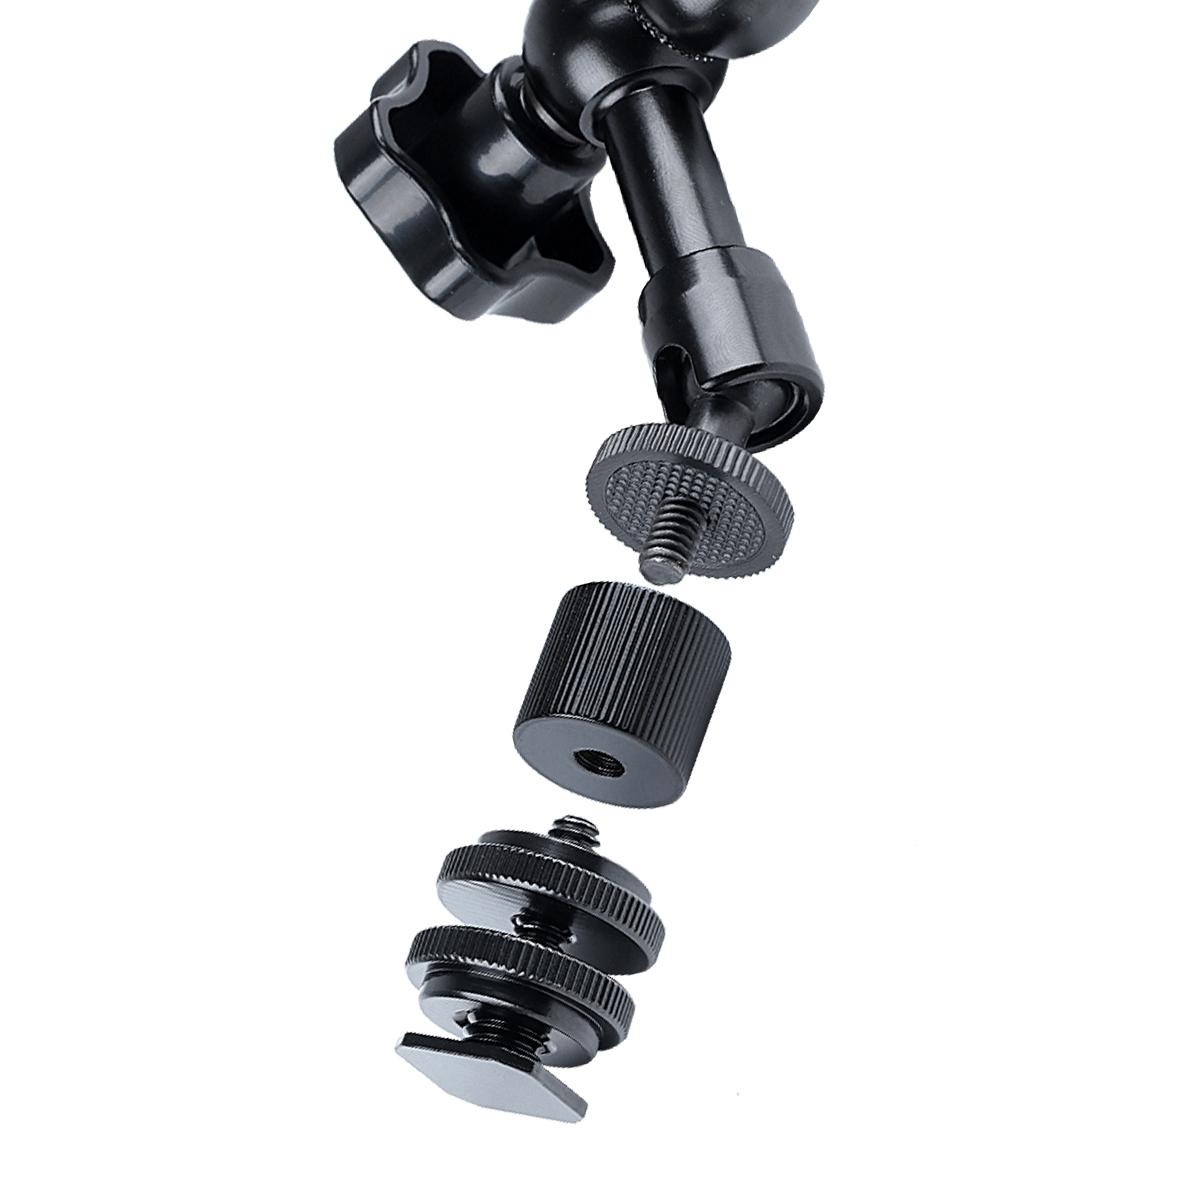 7 inch Adjustable Friction Articulating Magic Arm + Large Claws Clips with Phone Clamp (Black)